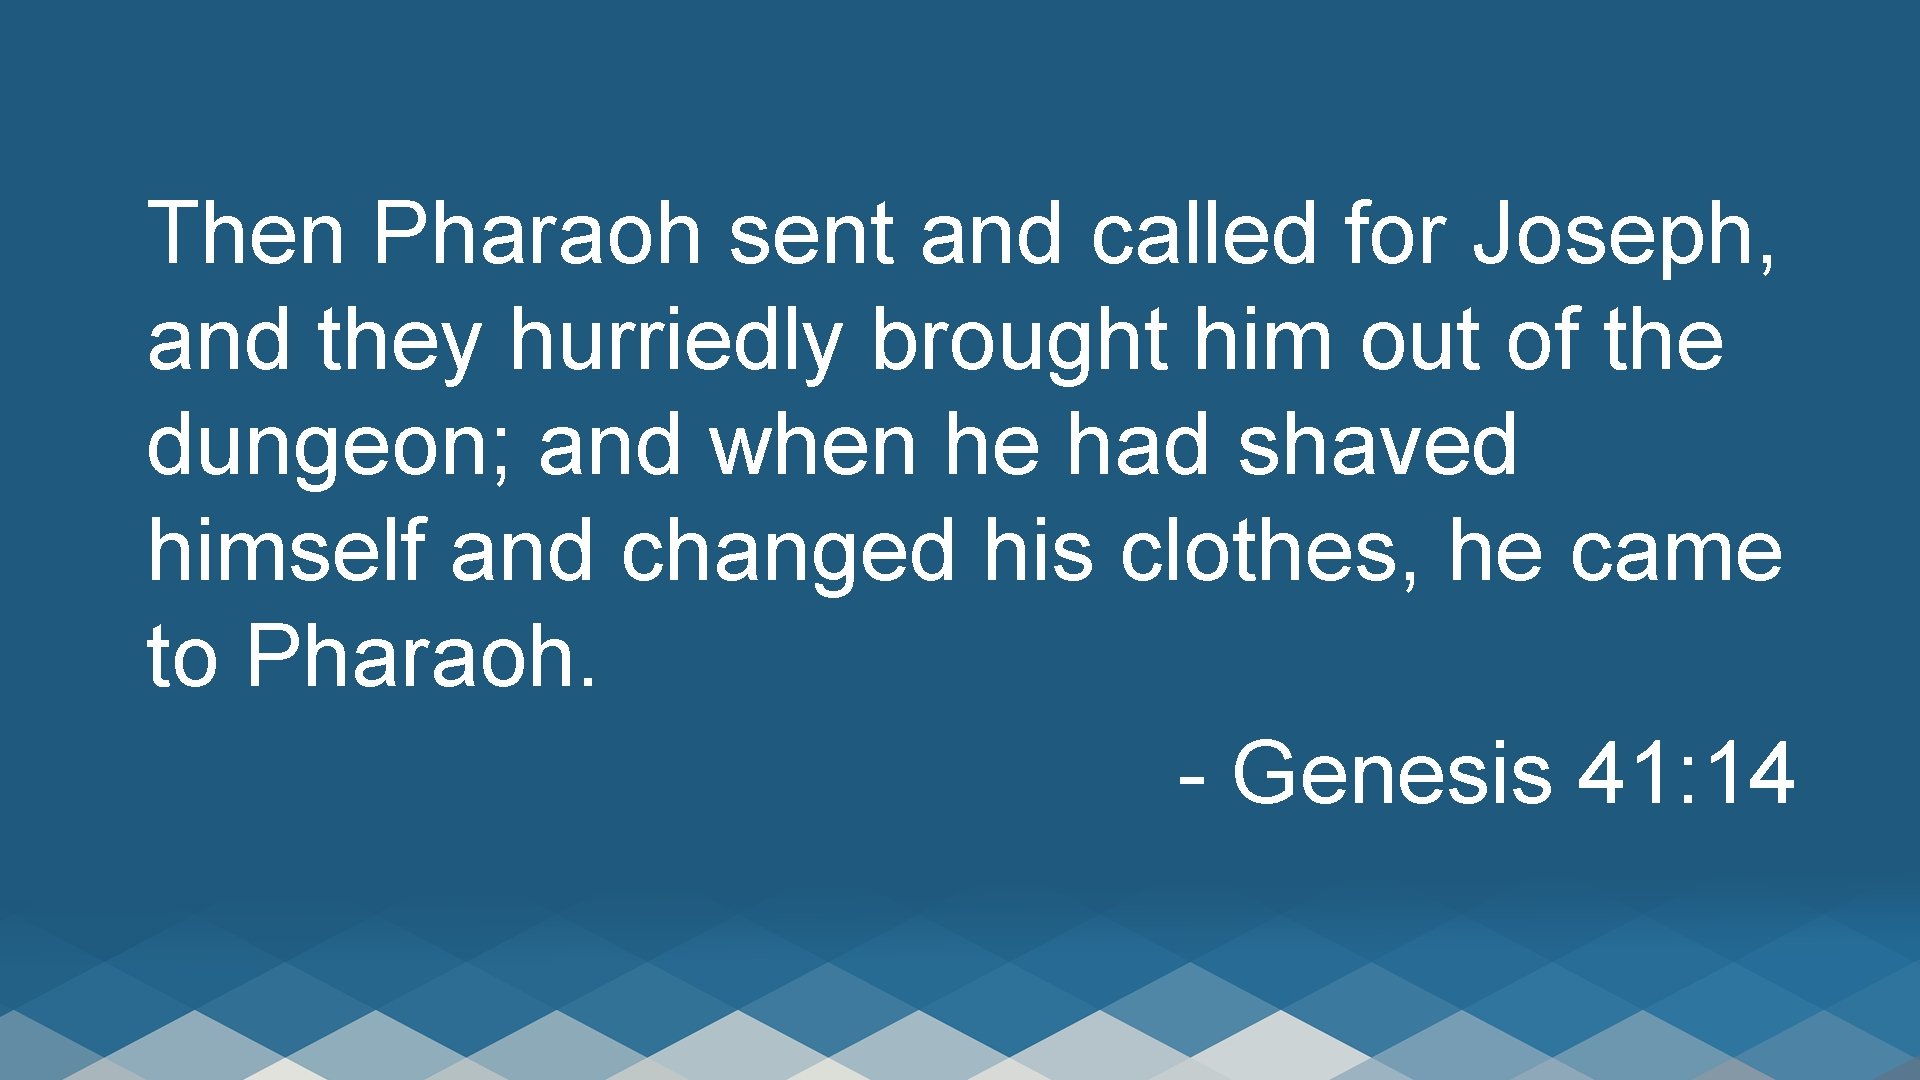 Then Pharaoh sent and called for Joseph, and they hurriedly brought him out of